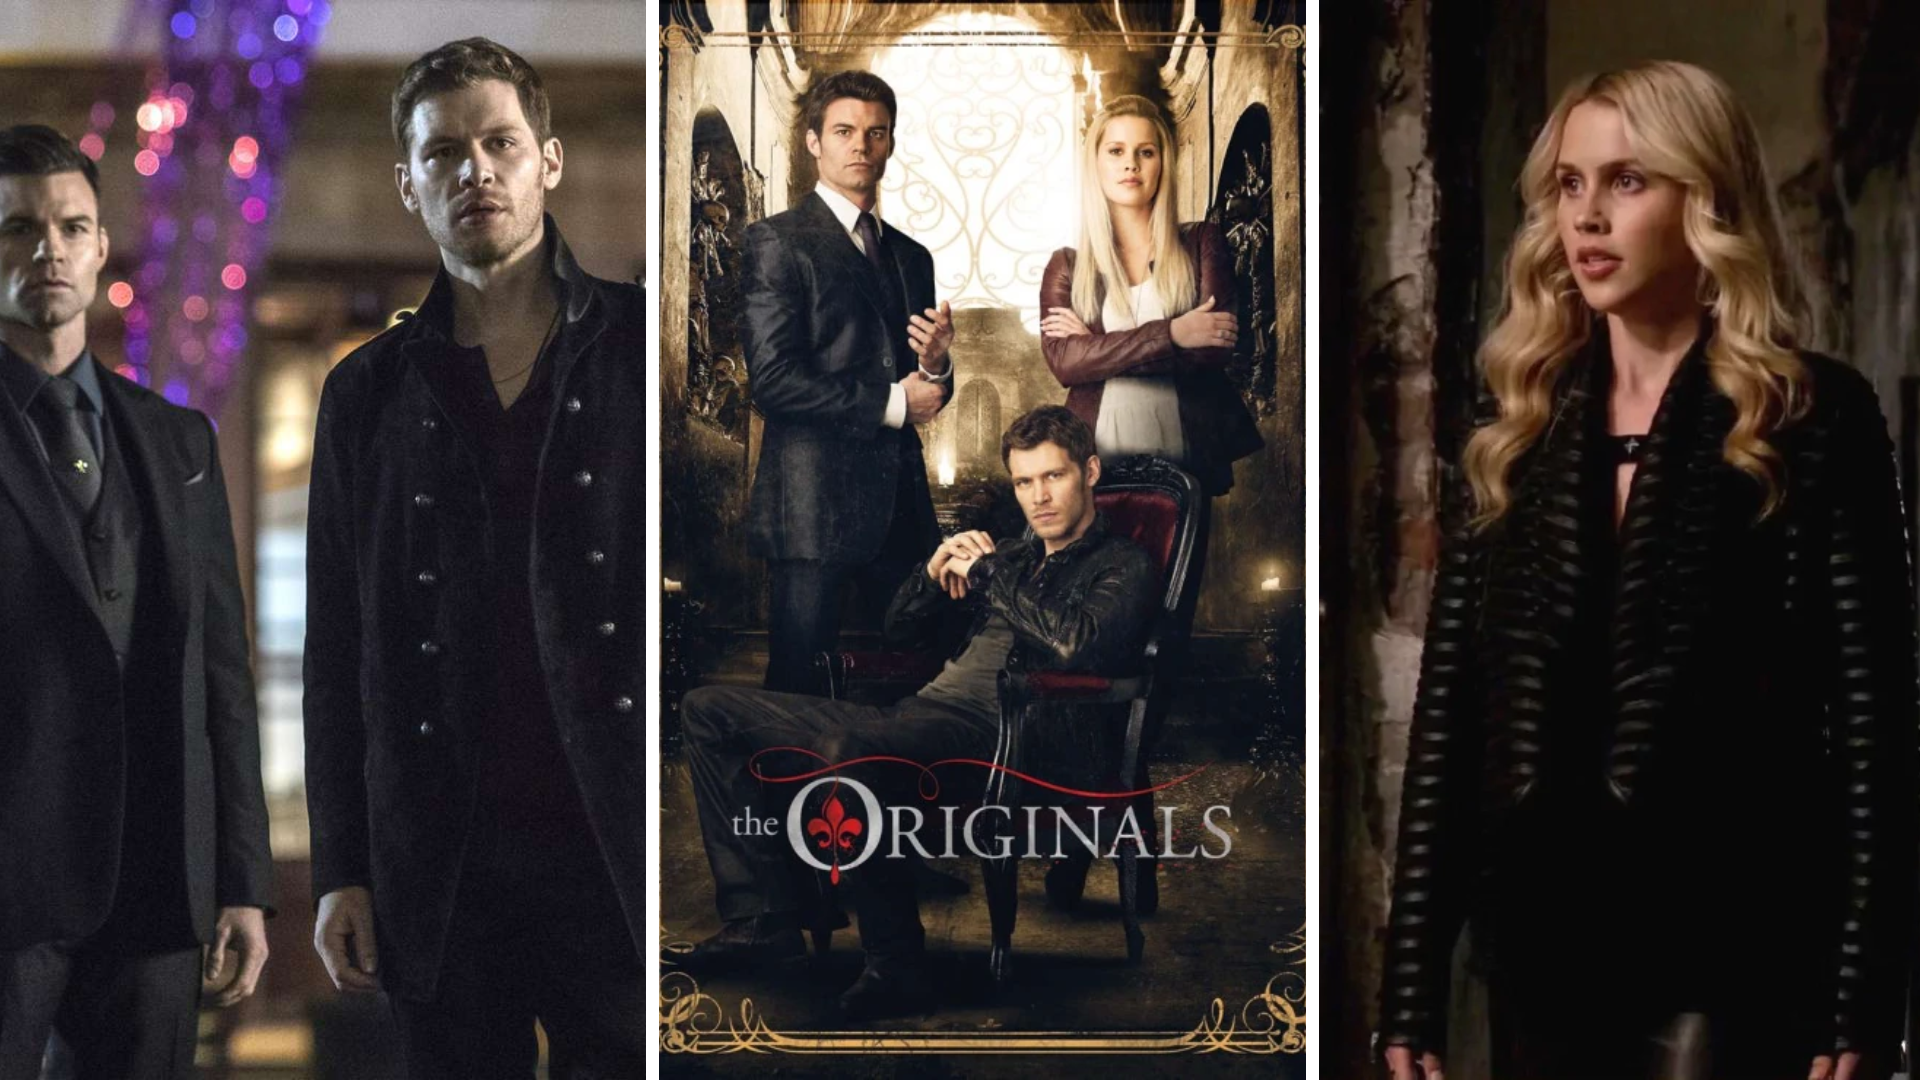 Modern Vampire Style Inspired by 'The Originals'